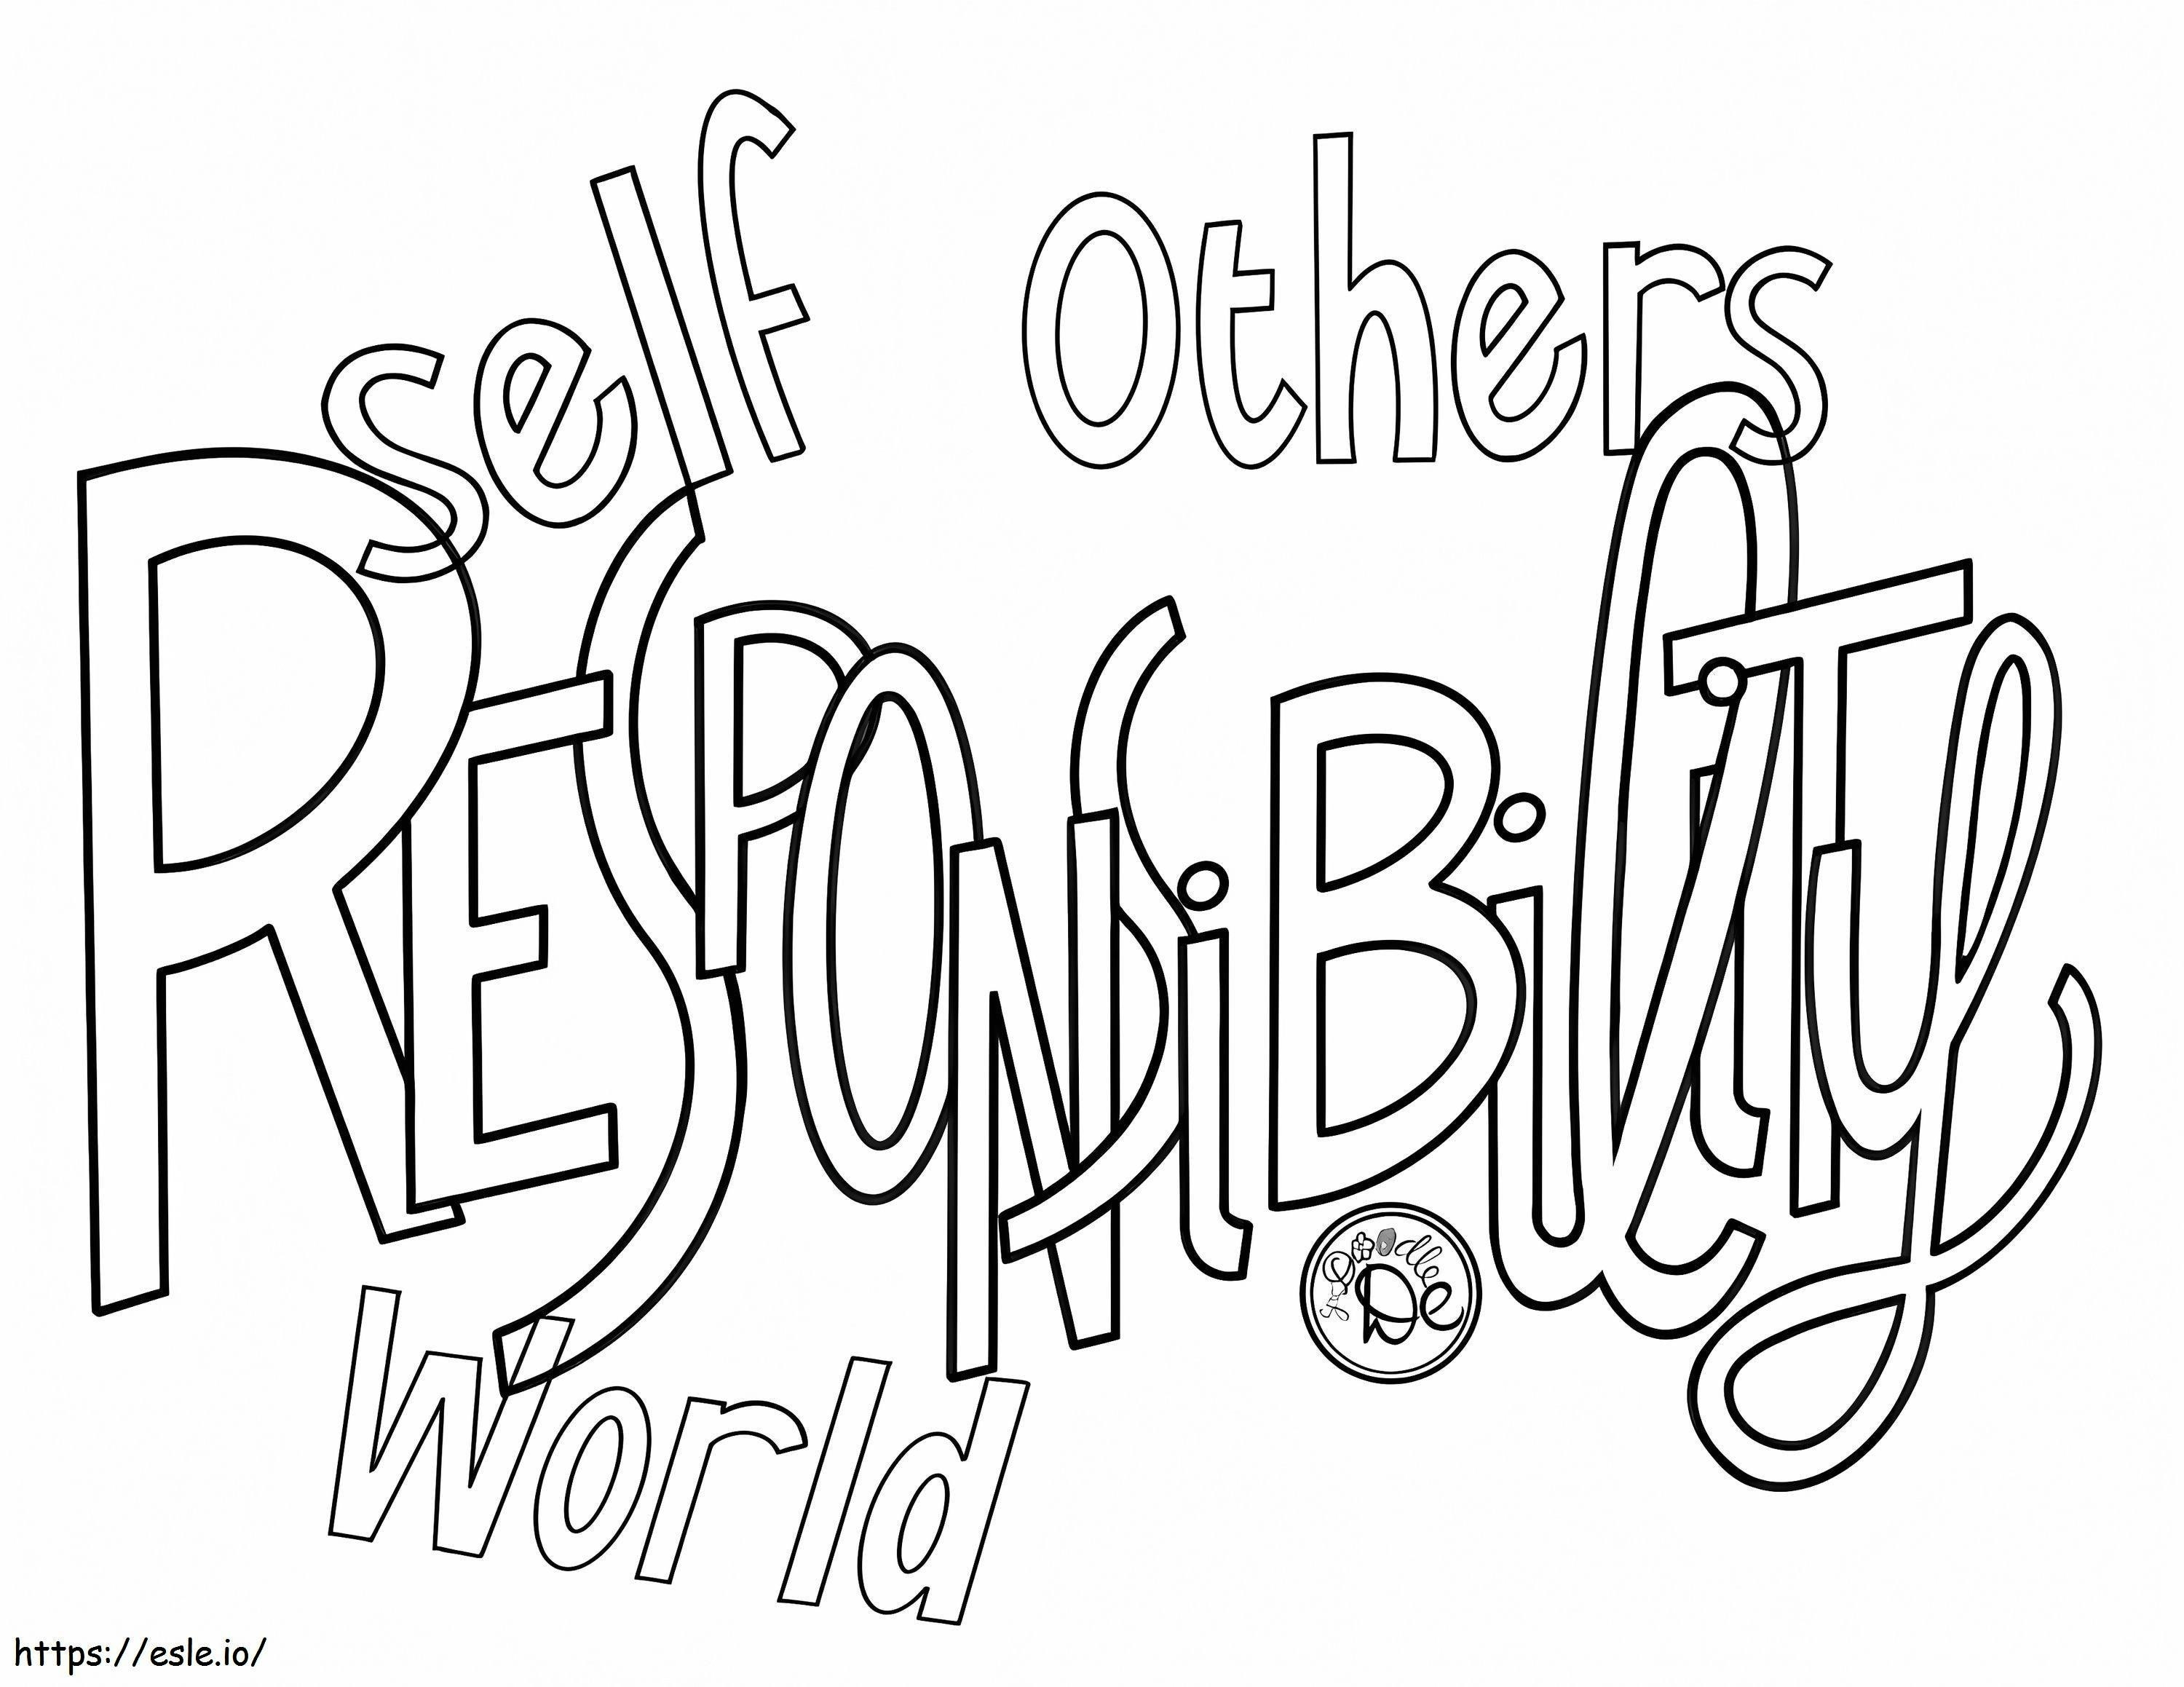 Responsibility Free Printable coloring page